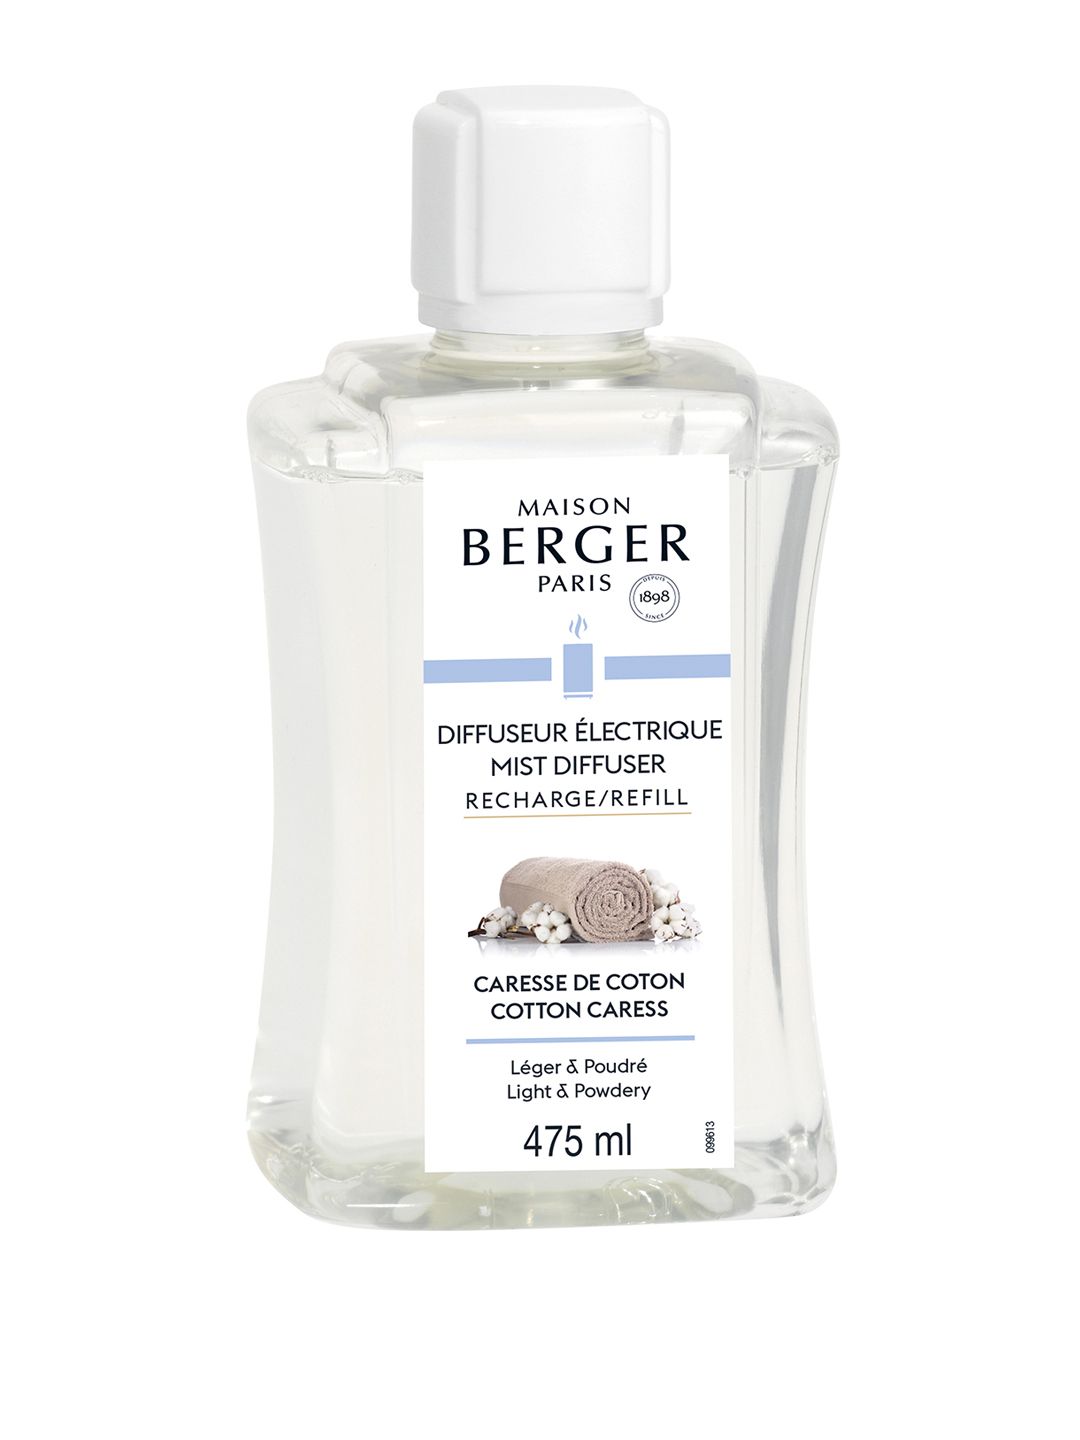 MAISON BERGER Cotton Caress Oil Refill 475ml Price in India